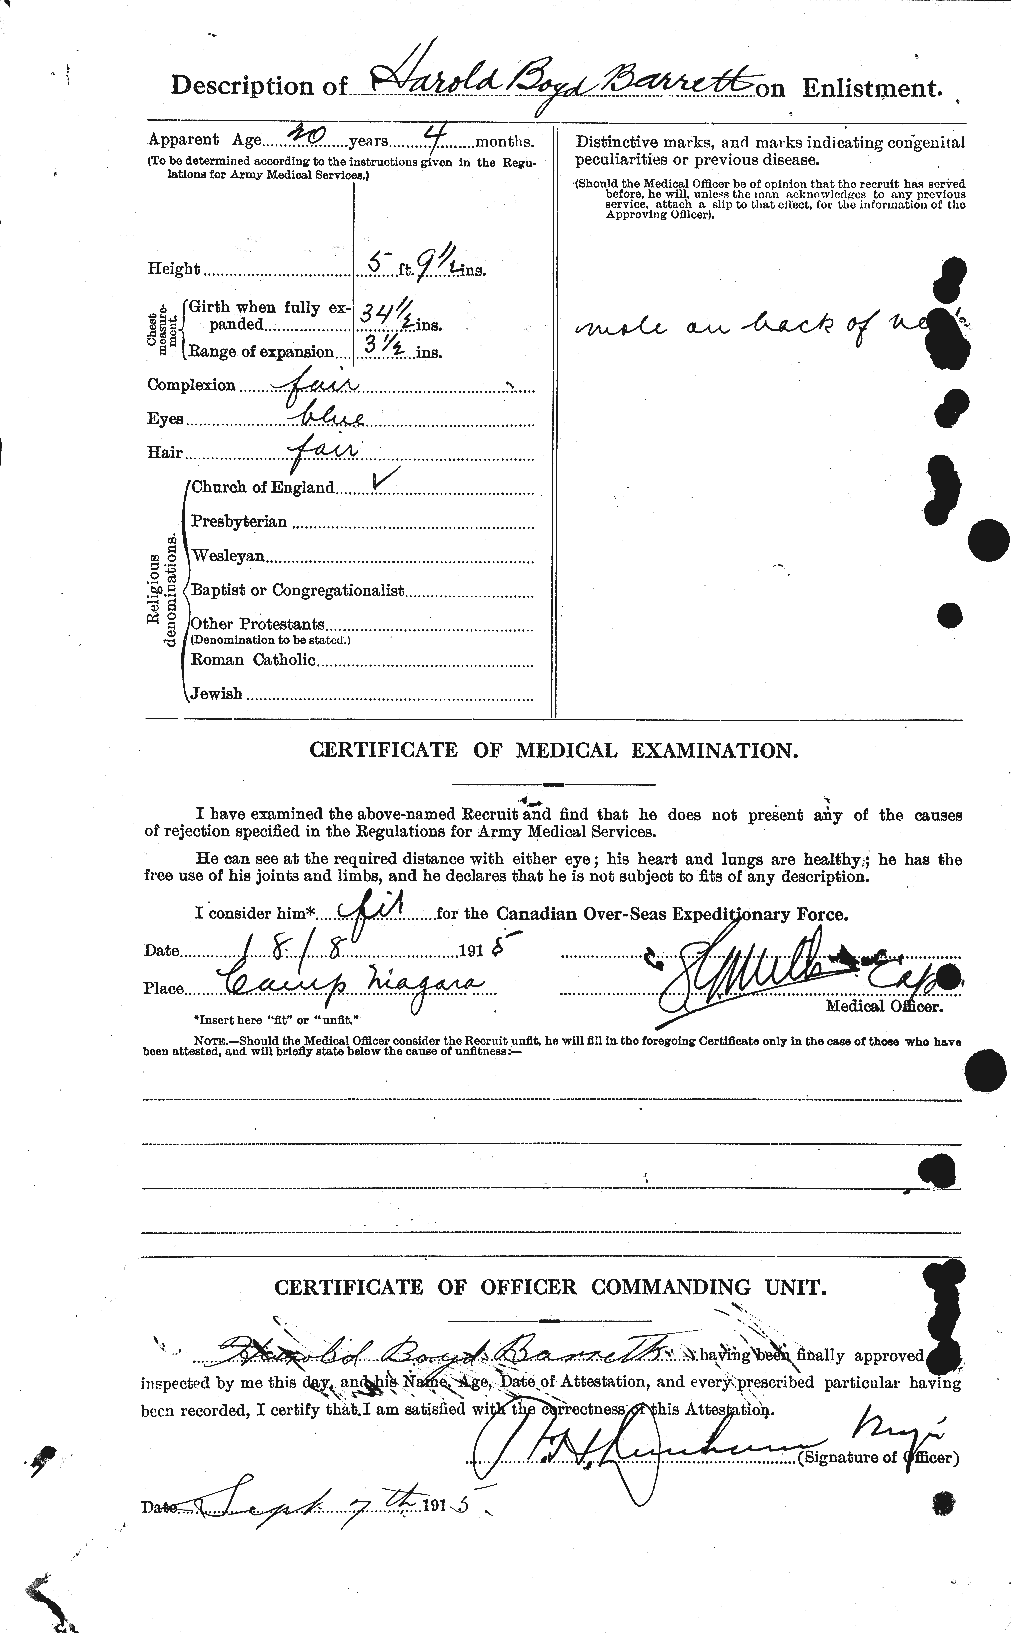 Personnel Records of the First World War - CEF 220299b